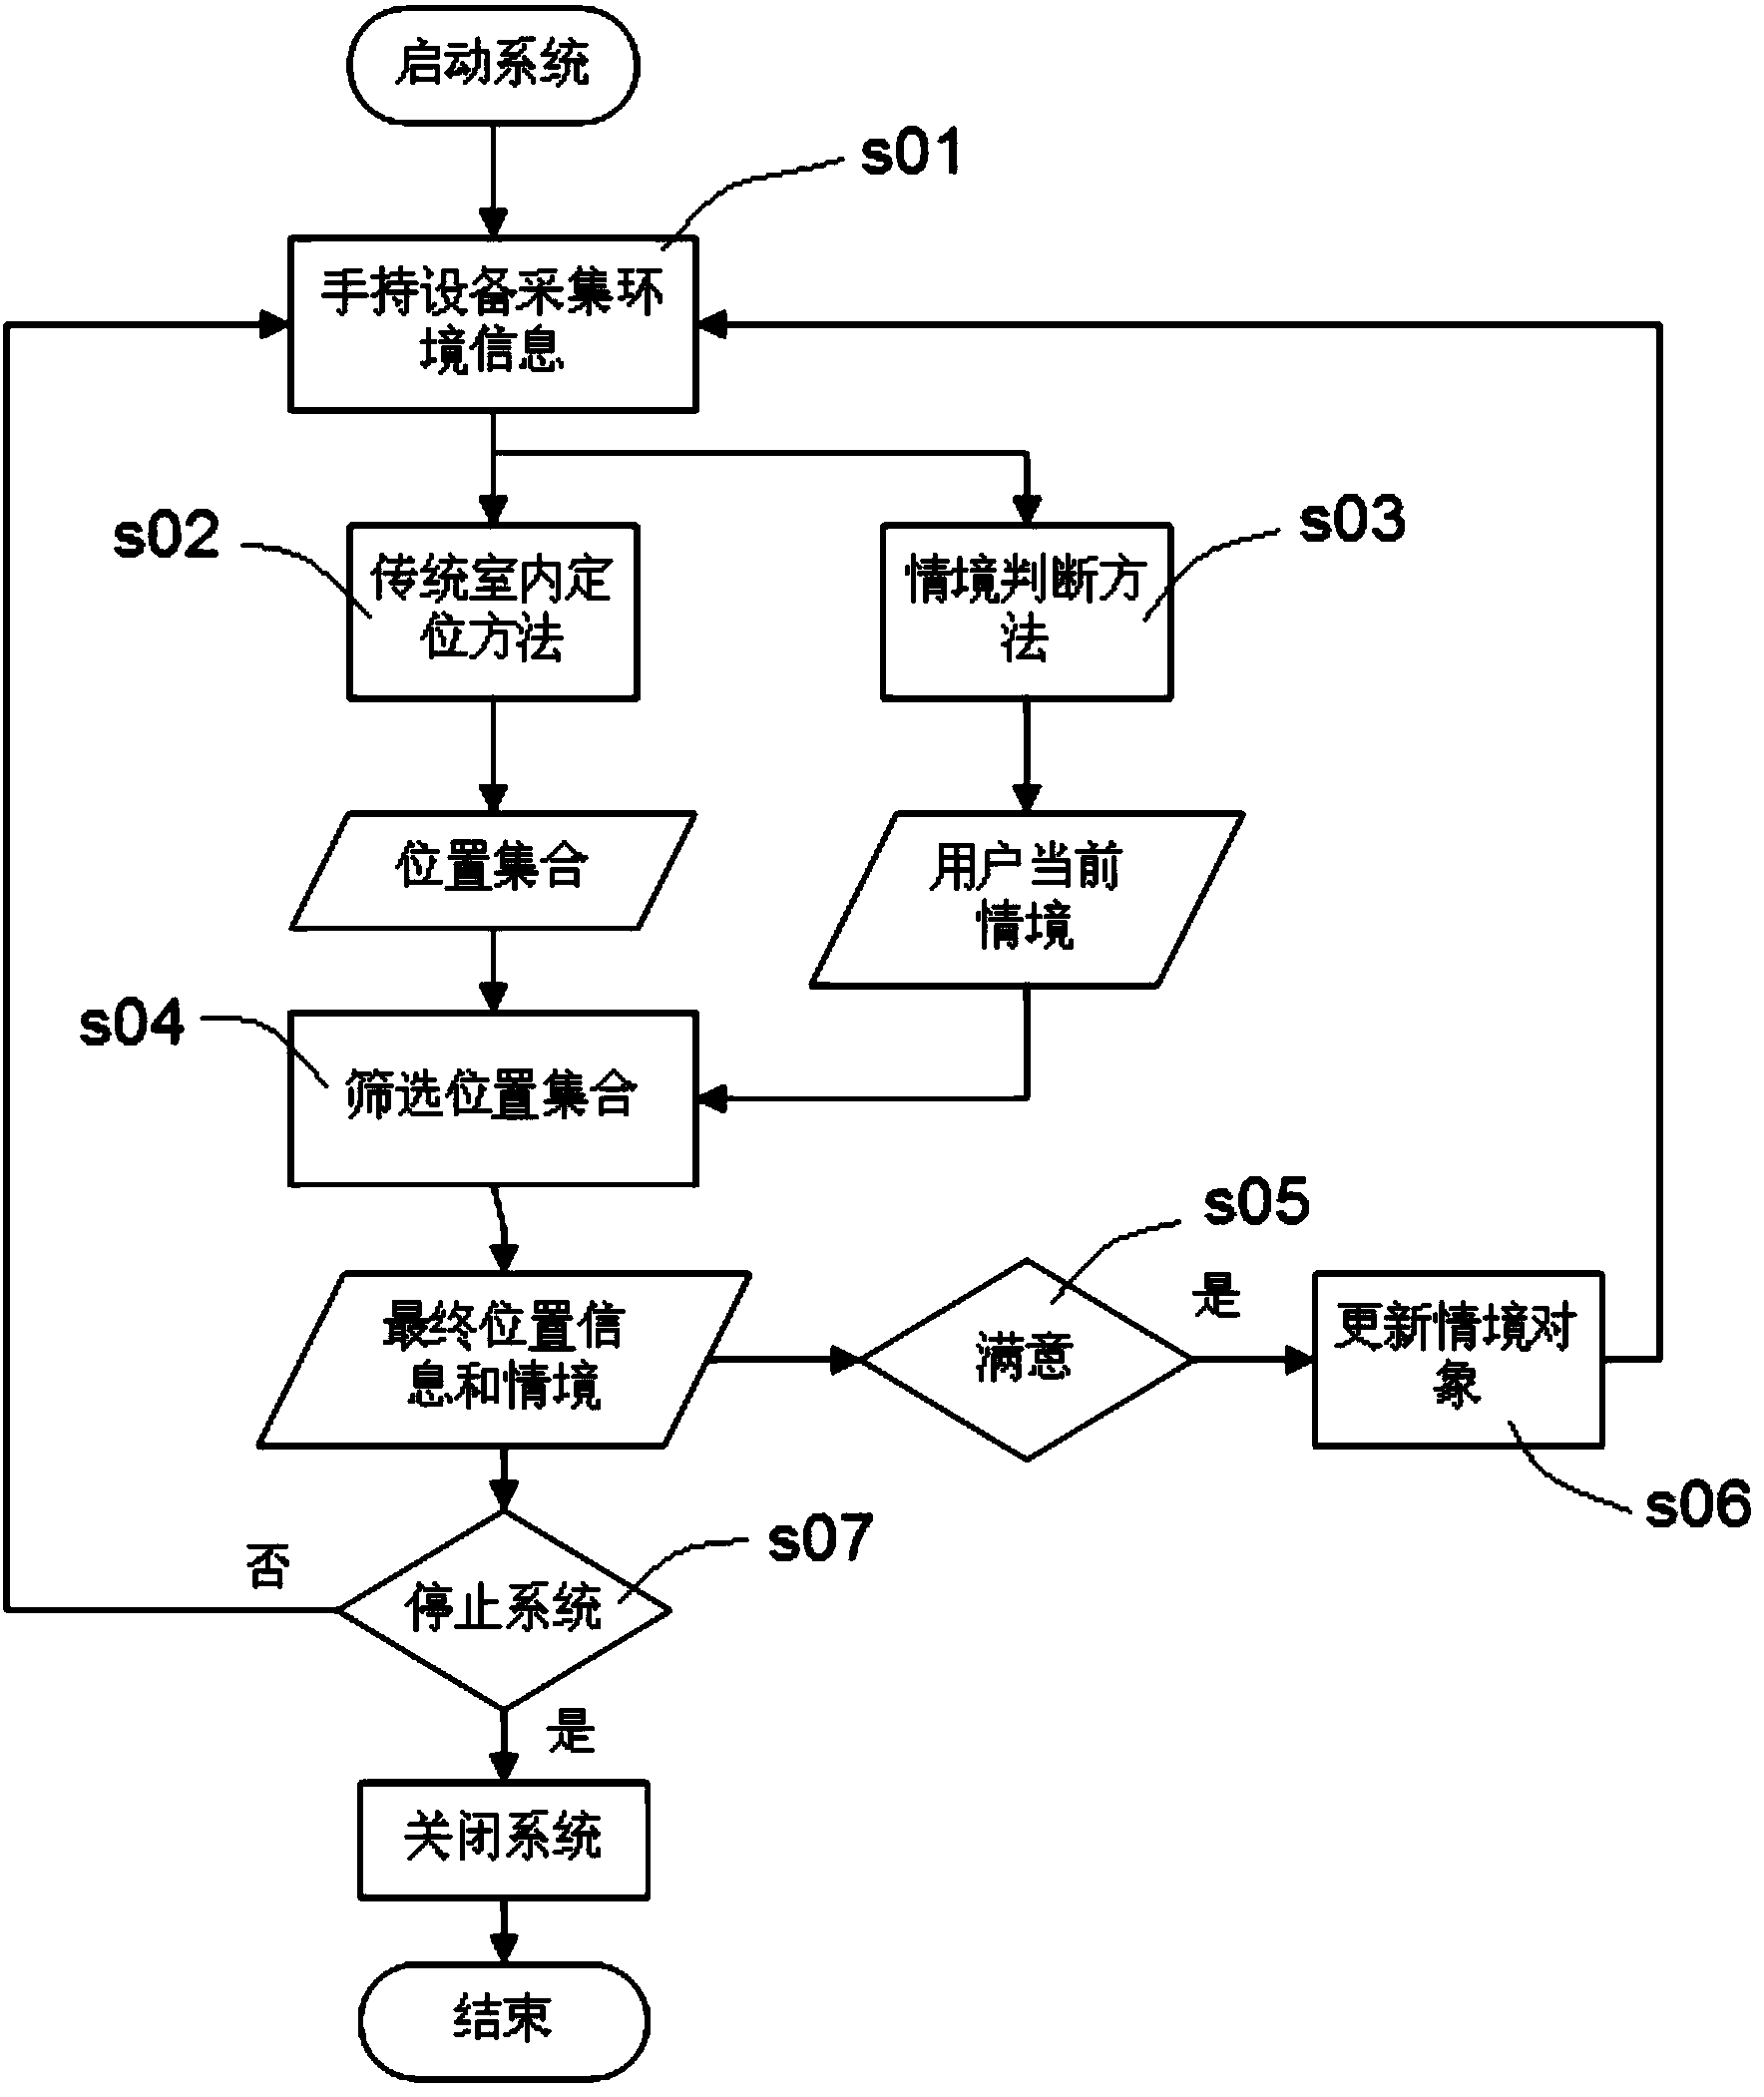 Situation-related indoor positioning method and system